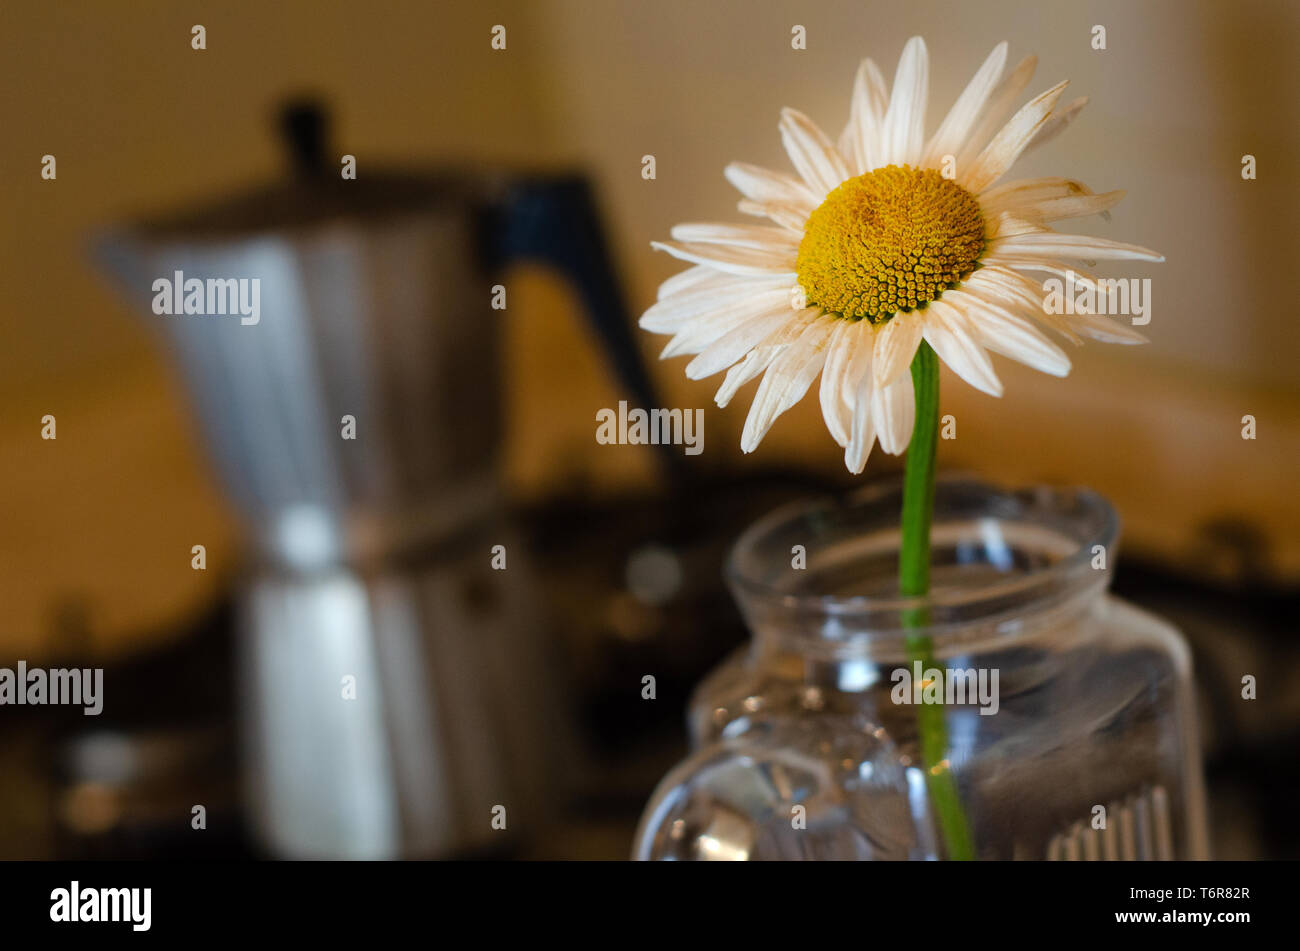 Cheerful Yellow flower with Italian style coffee pot in the background Stock Photo